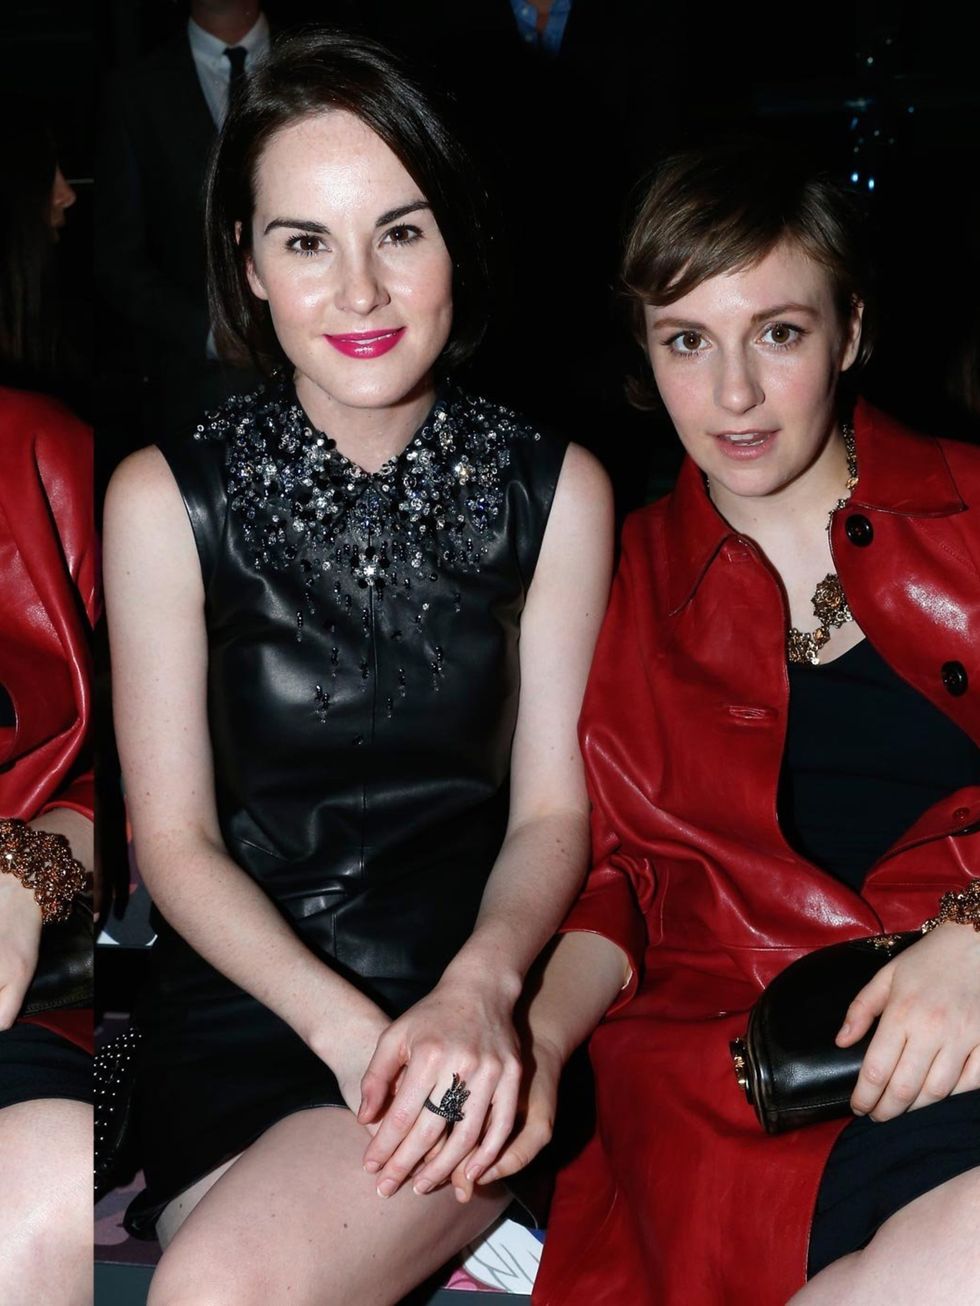 <p>Michelle Dockery and Lena Dunham at the <a href="http://www.elleuk.com/catwalk/designer-a-z/miu-miu/spring-summer-2014/collection">Miu Miu</a> SS14 show during Paris Fashion Week.</p><p><a href="http://www.elleuk.com/star-style/red-carpet/front-row-at-